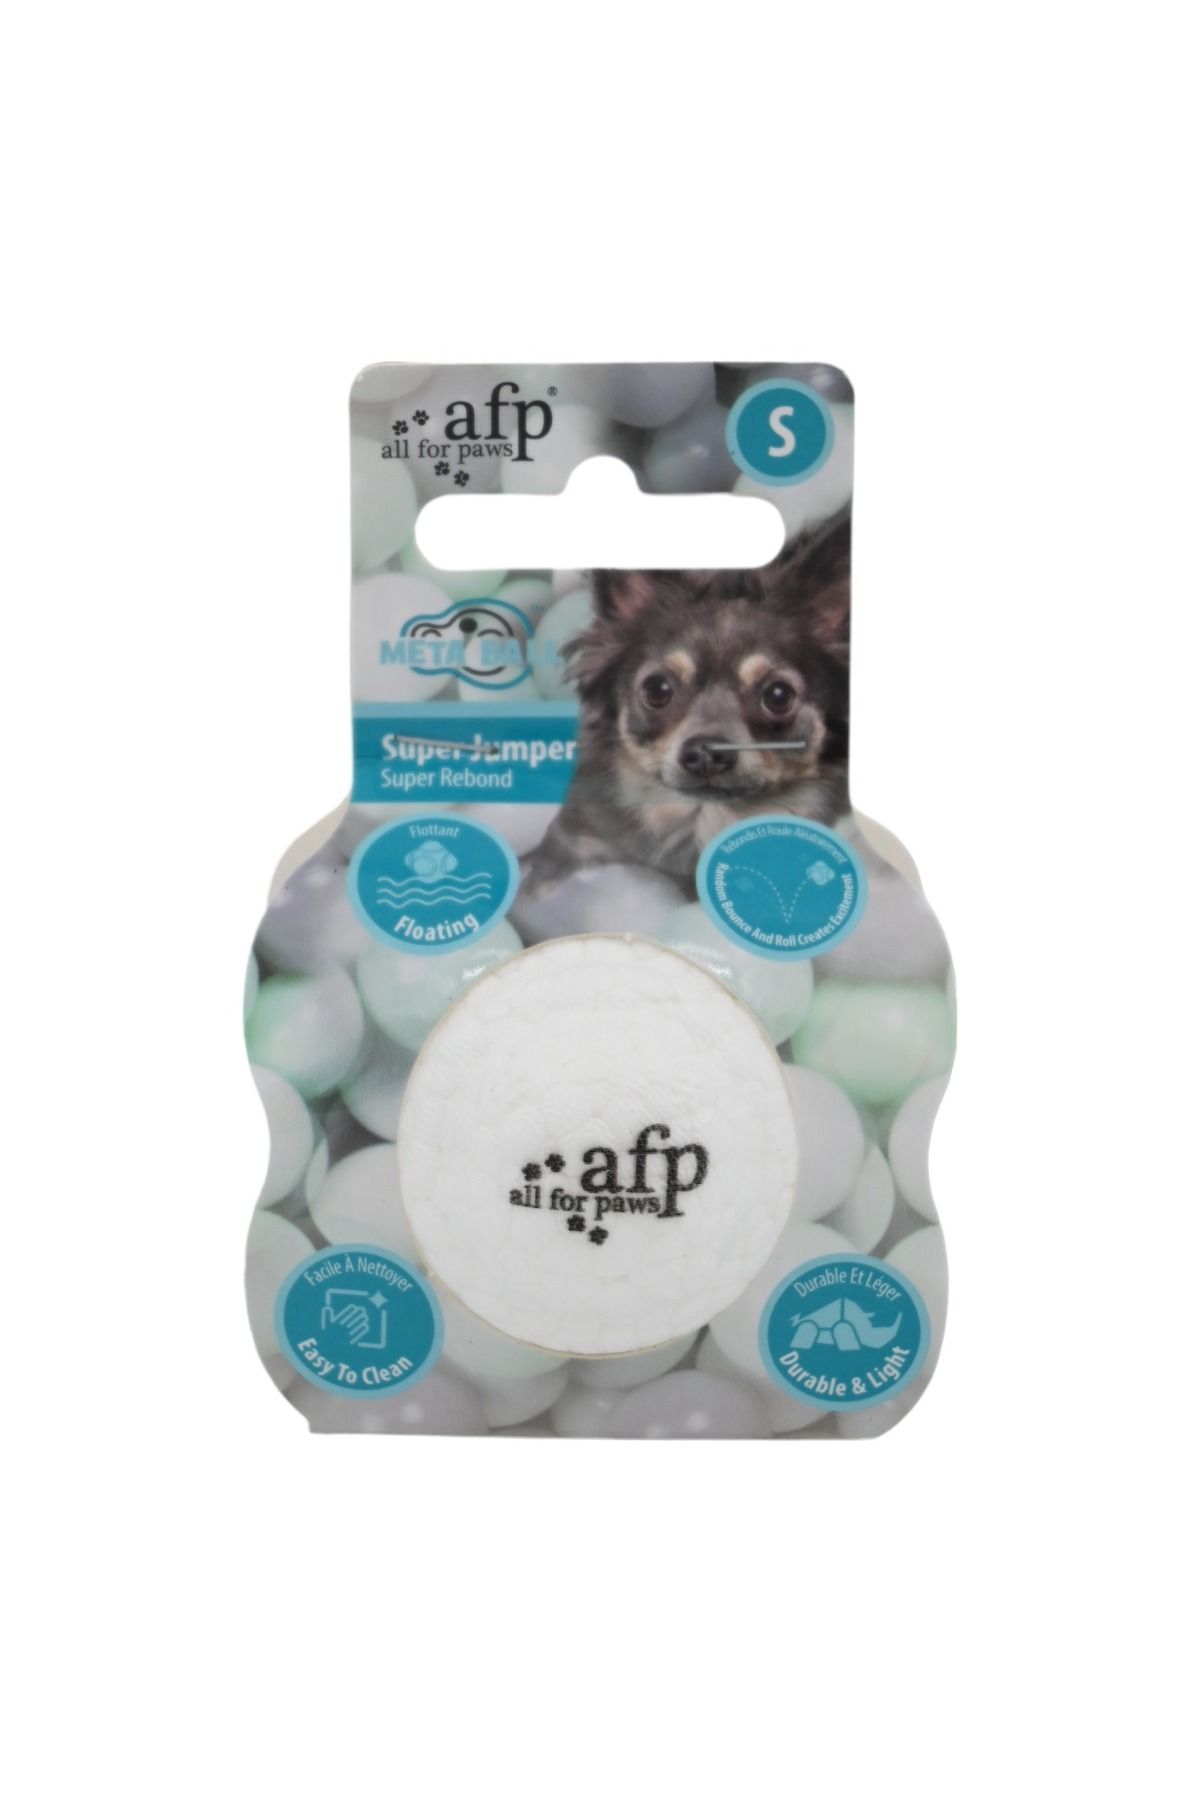 All For Paws Meta Ball - Super Zıplayan Top Small